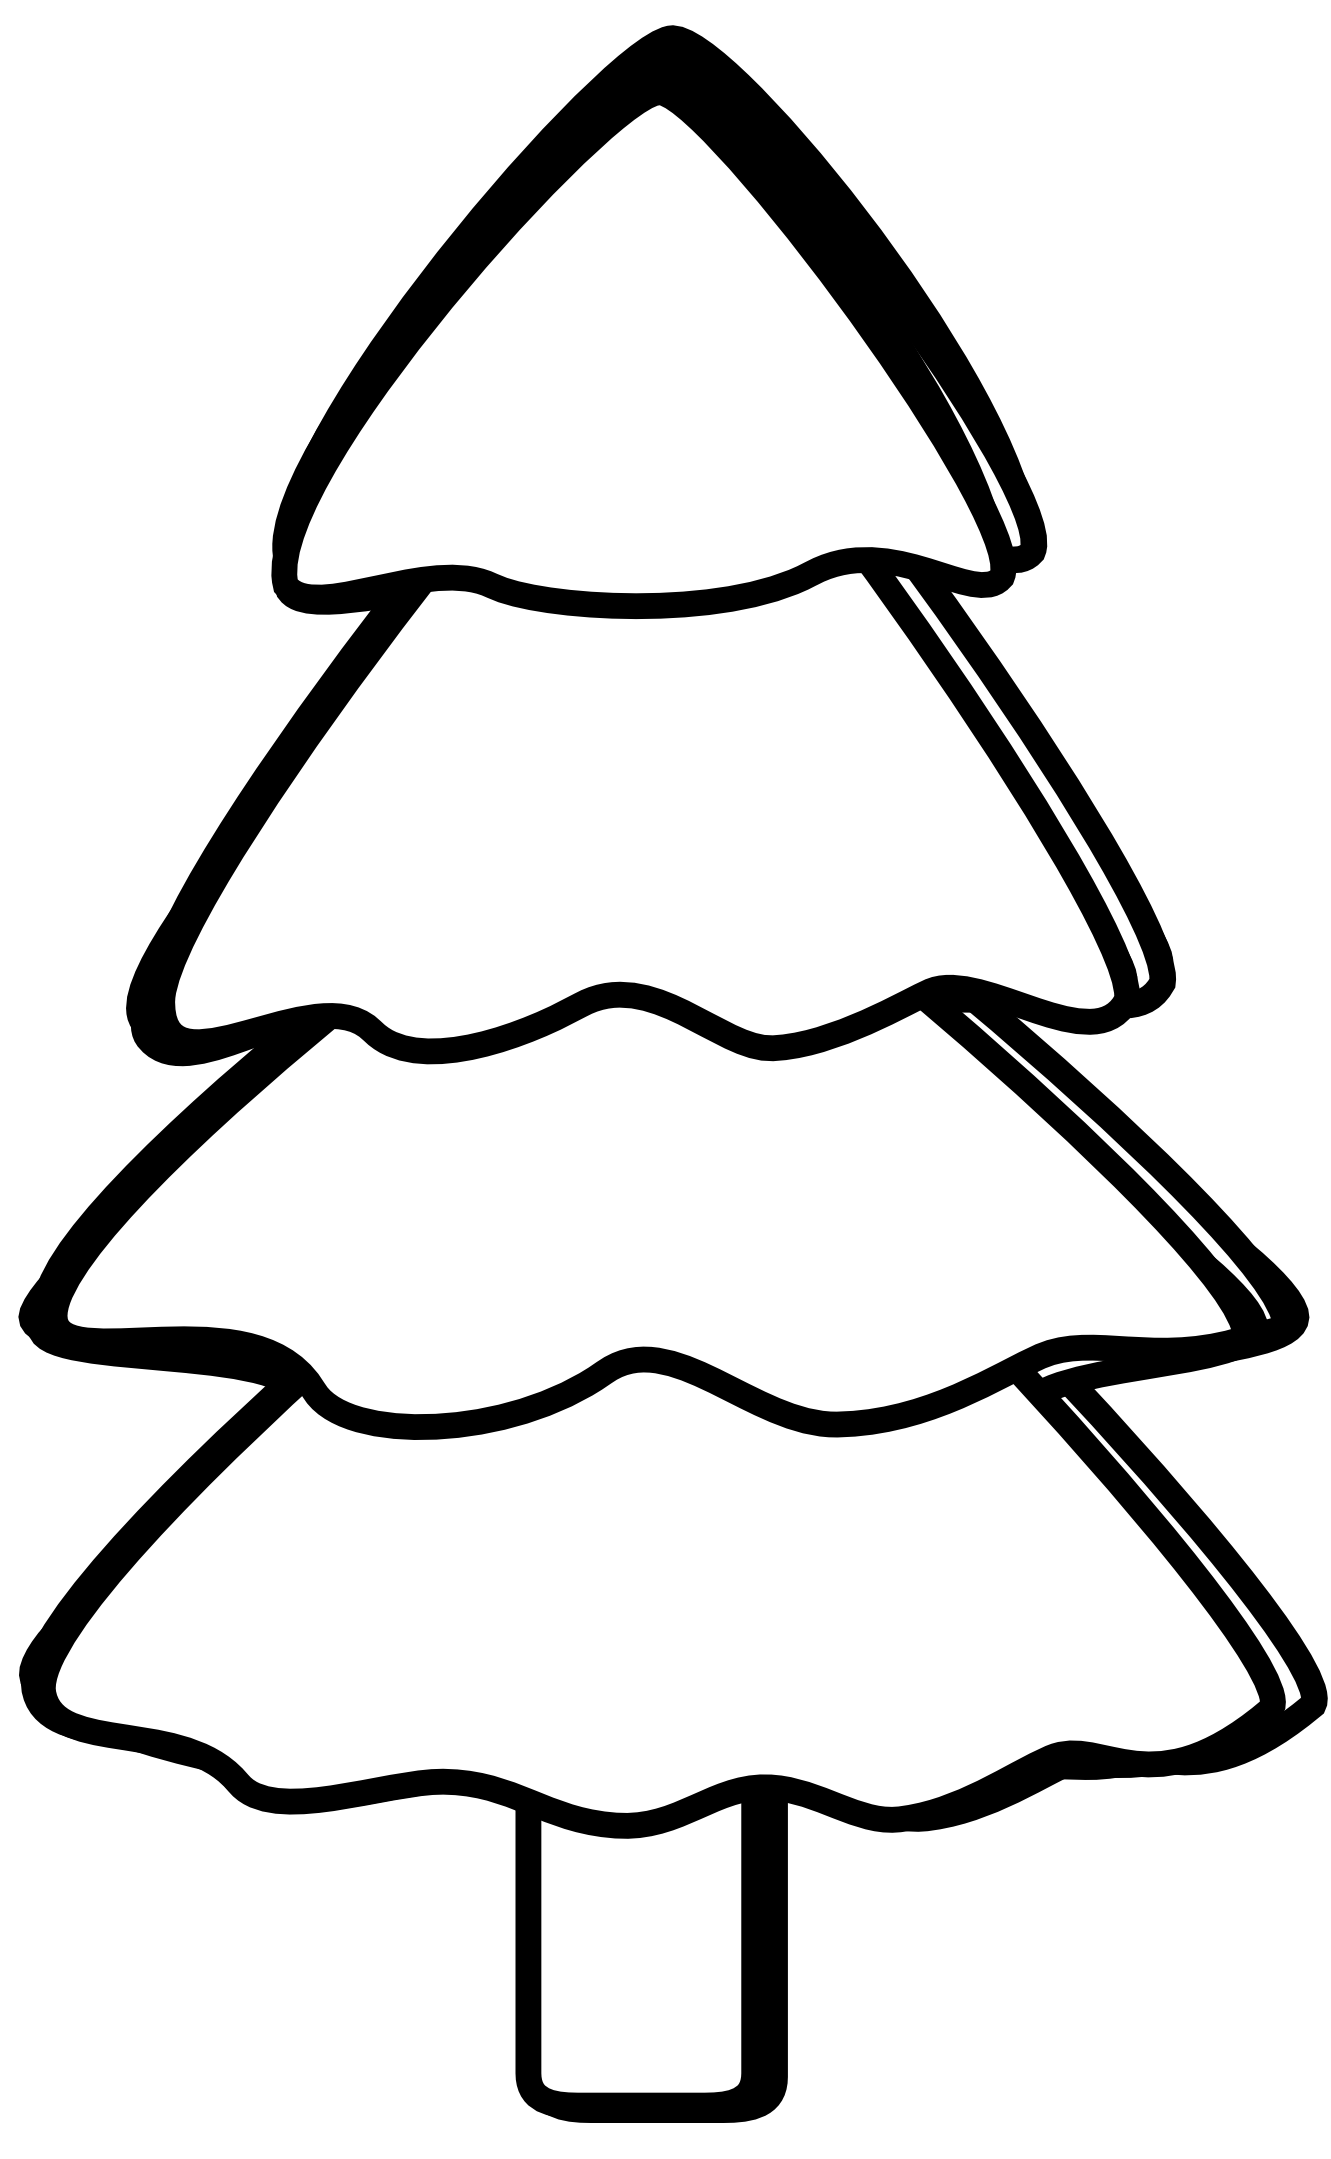 Clip Art Tree Branches Black And White - Free ...